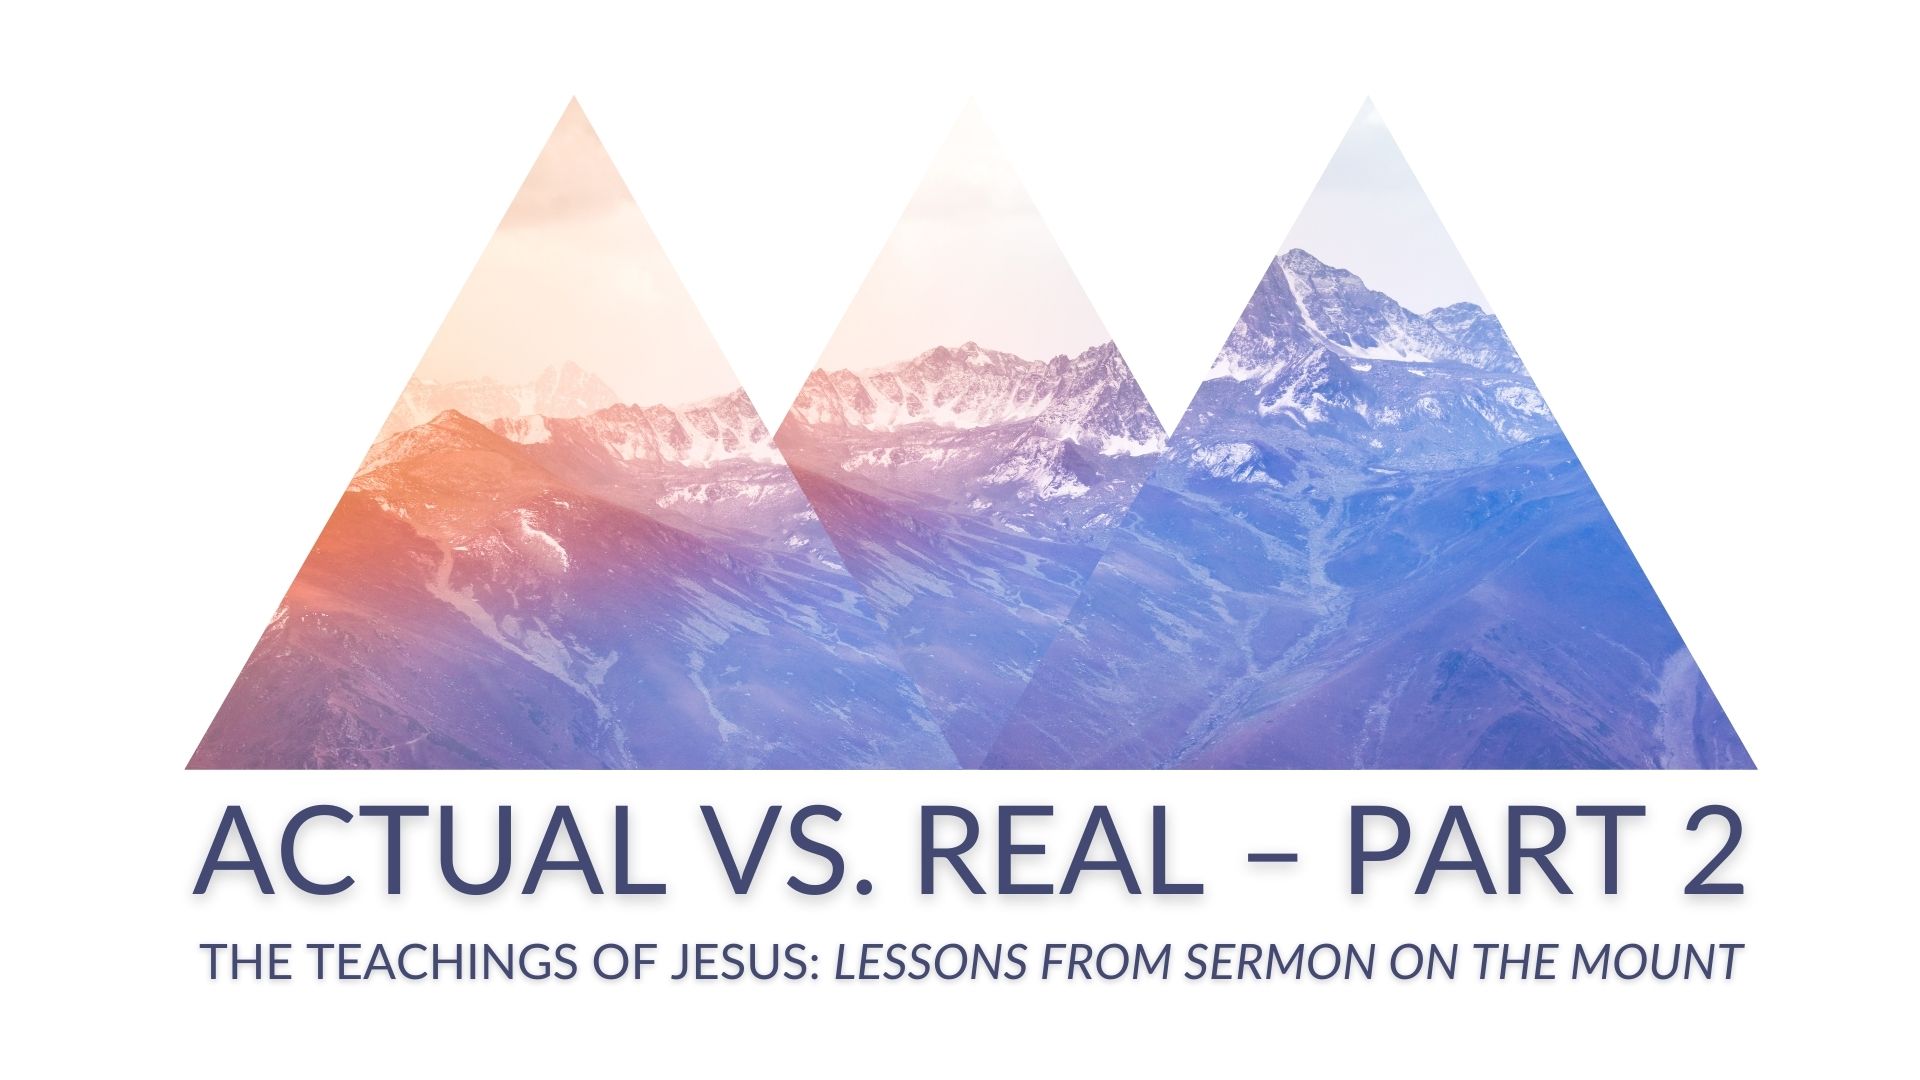 ACTUAL vs. REAL Part 2 - The Teachings of Jesus: Lessons from the Sermon on the Mount